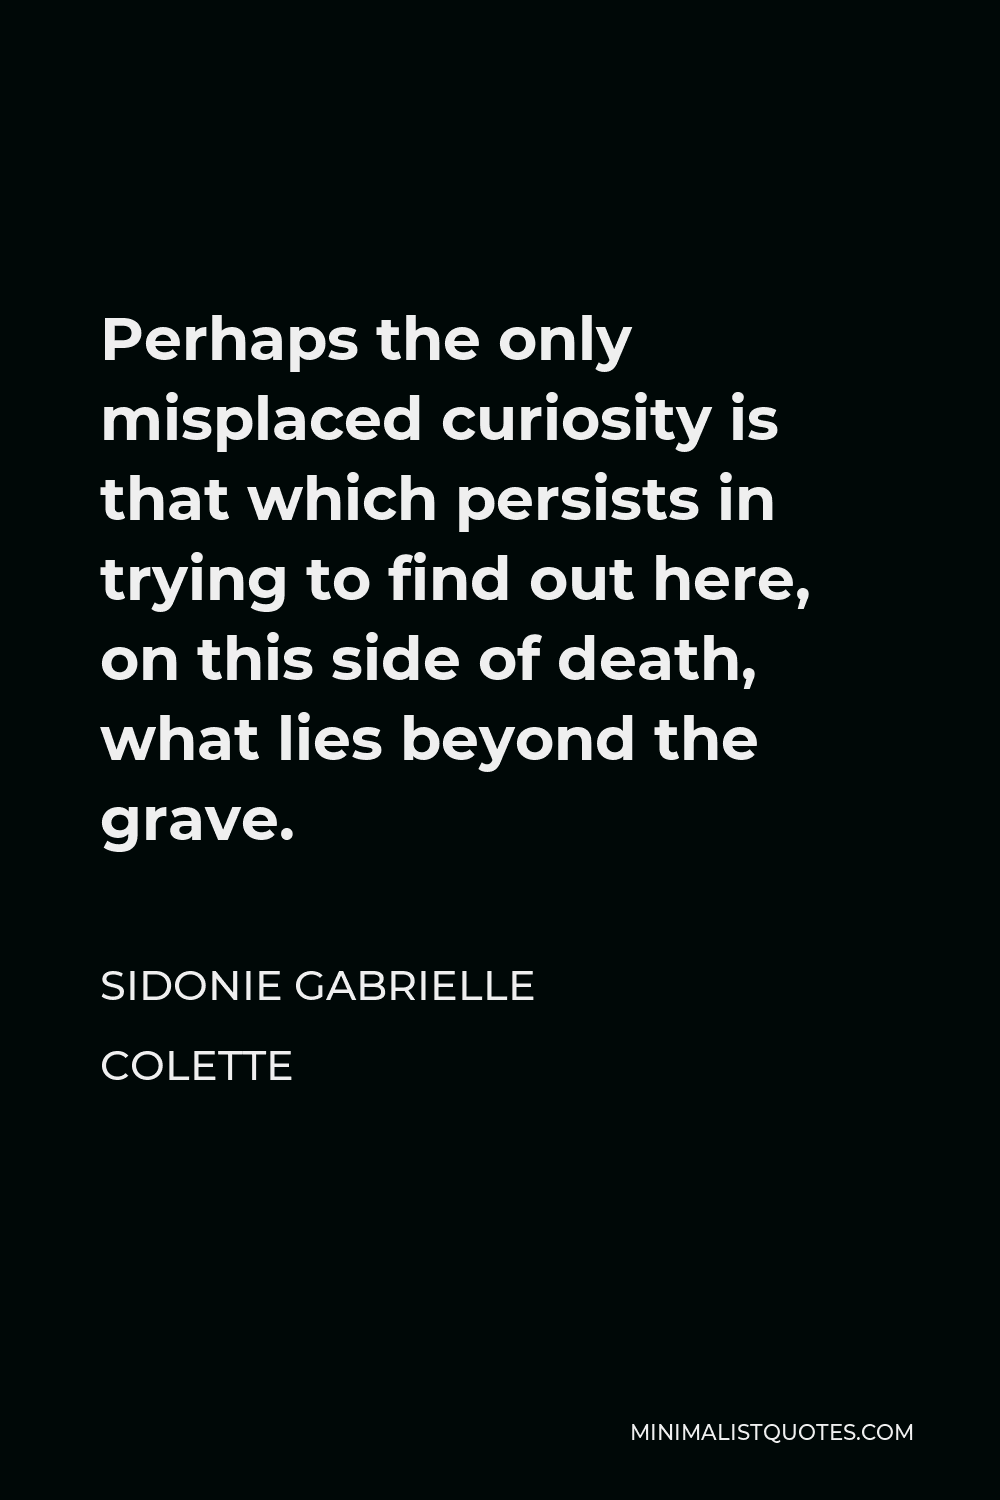 Sidonie Gabrielle Colette Quote - Perhaps the only misplaced curiosity is that which persists in trying to find out here, on this side of death, what lies beyond the grave.